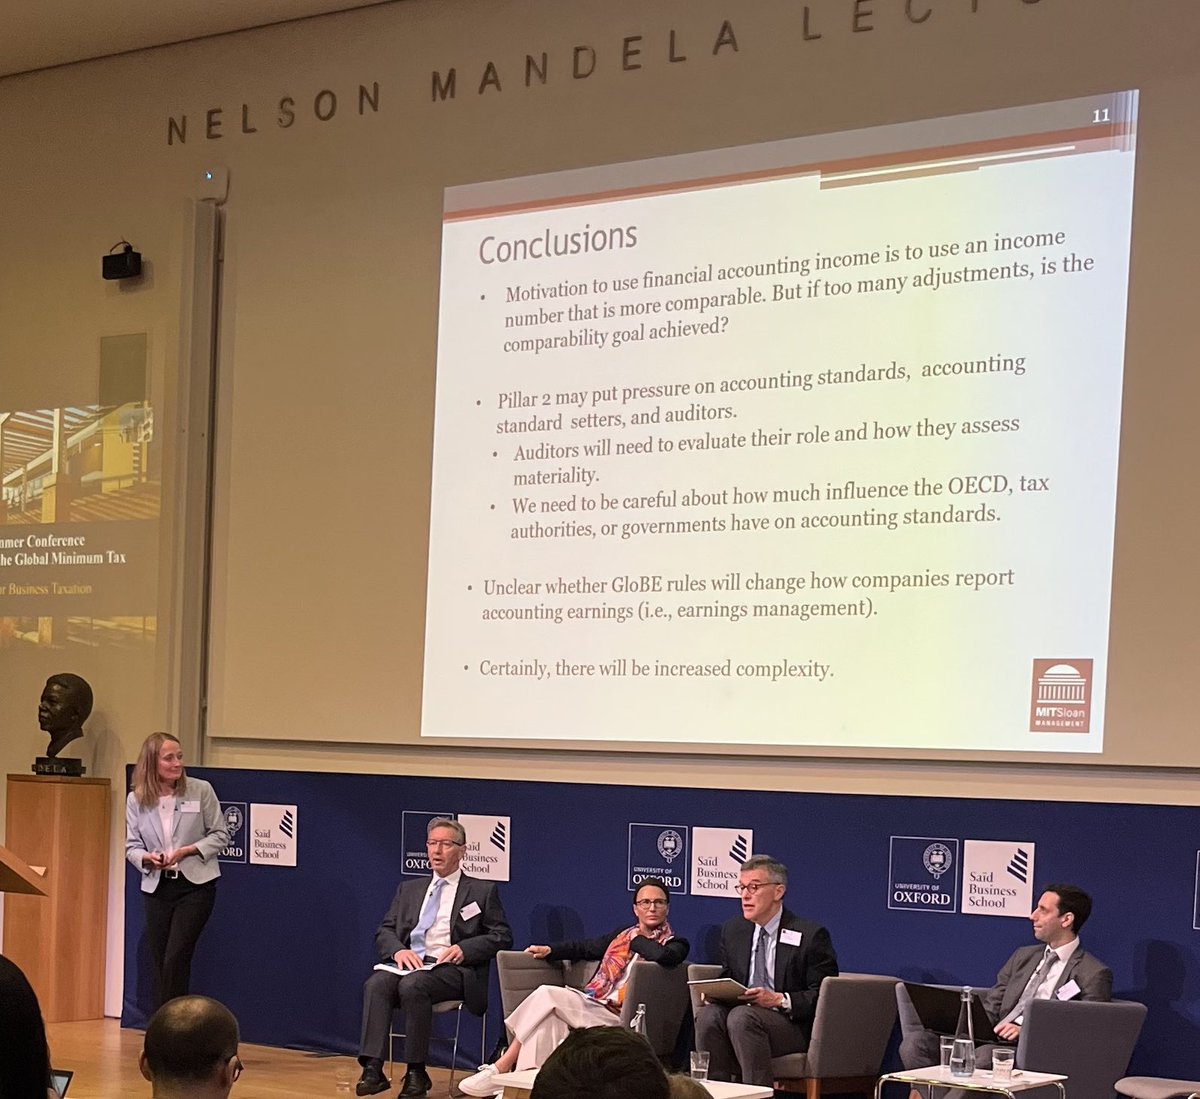 Professor Michelle Hanlon considers the complexities introduced by using financial accounting in determining the tax base under Pillar ll @OxfordTax Summer Conference.